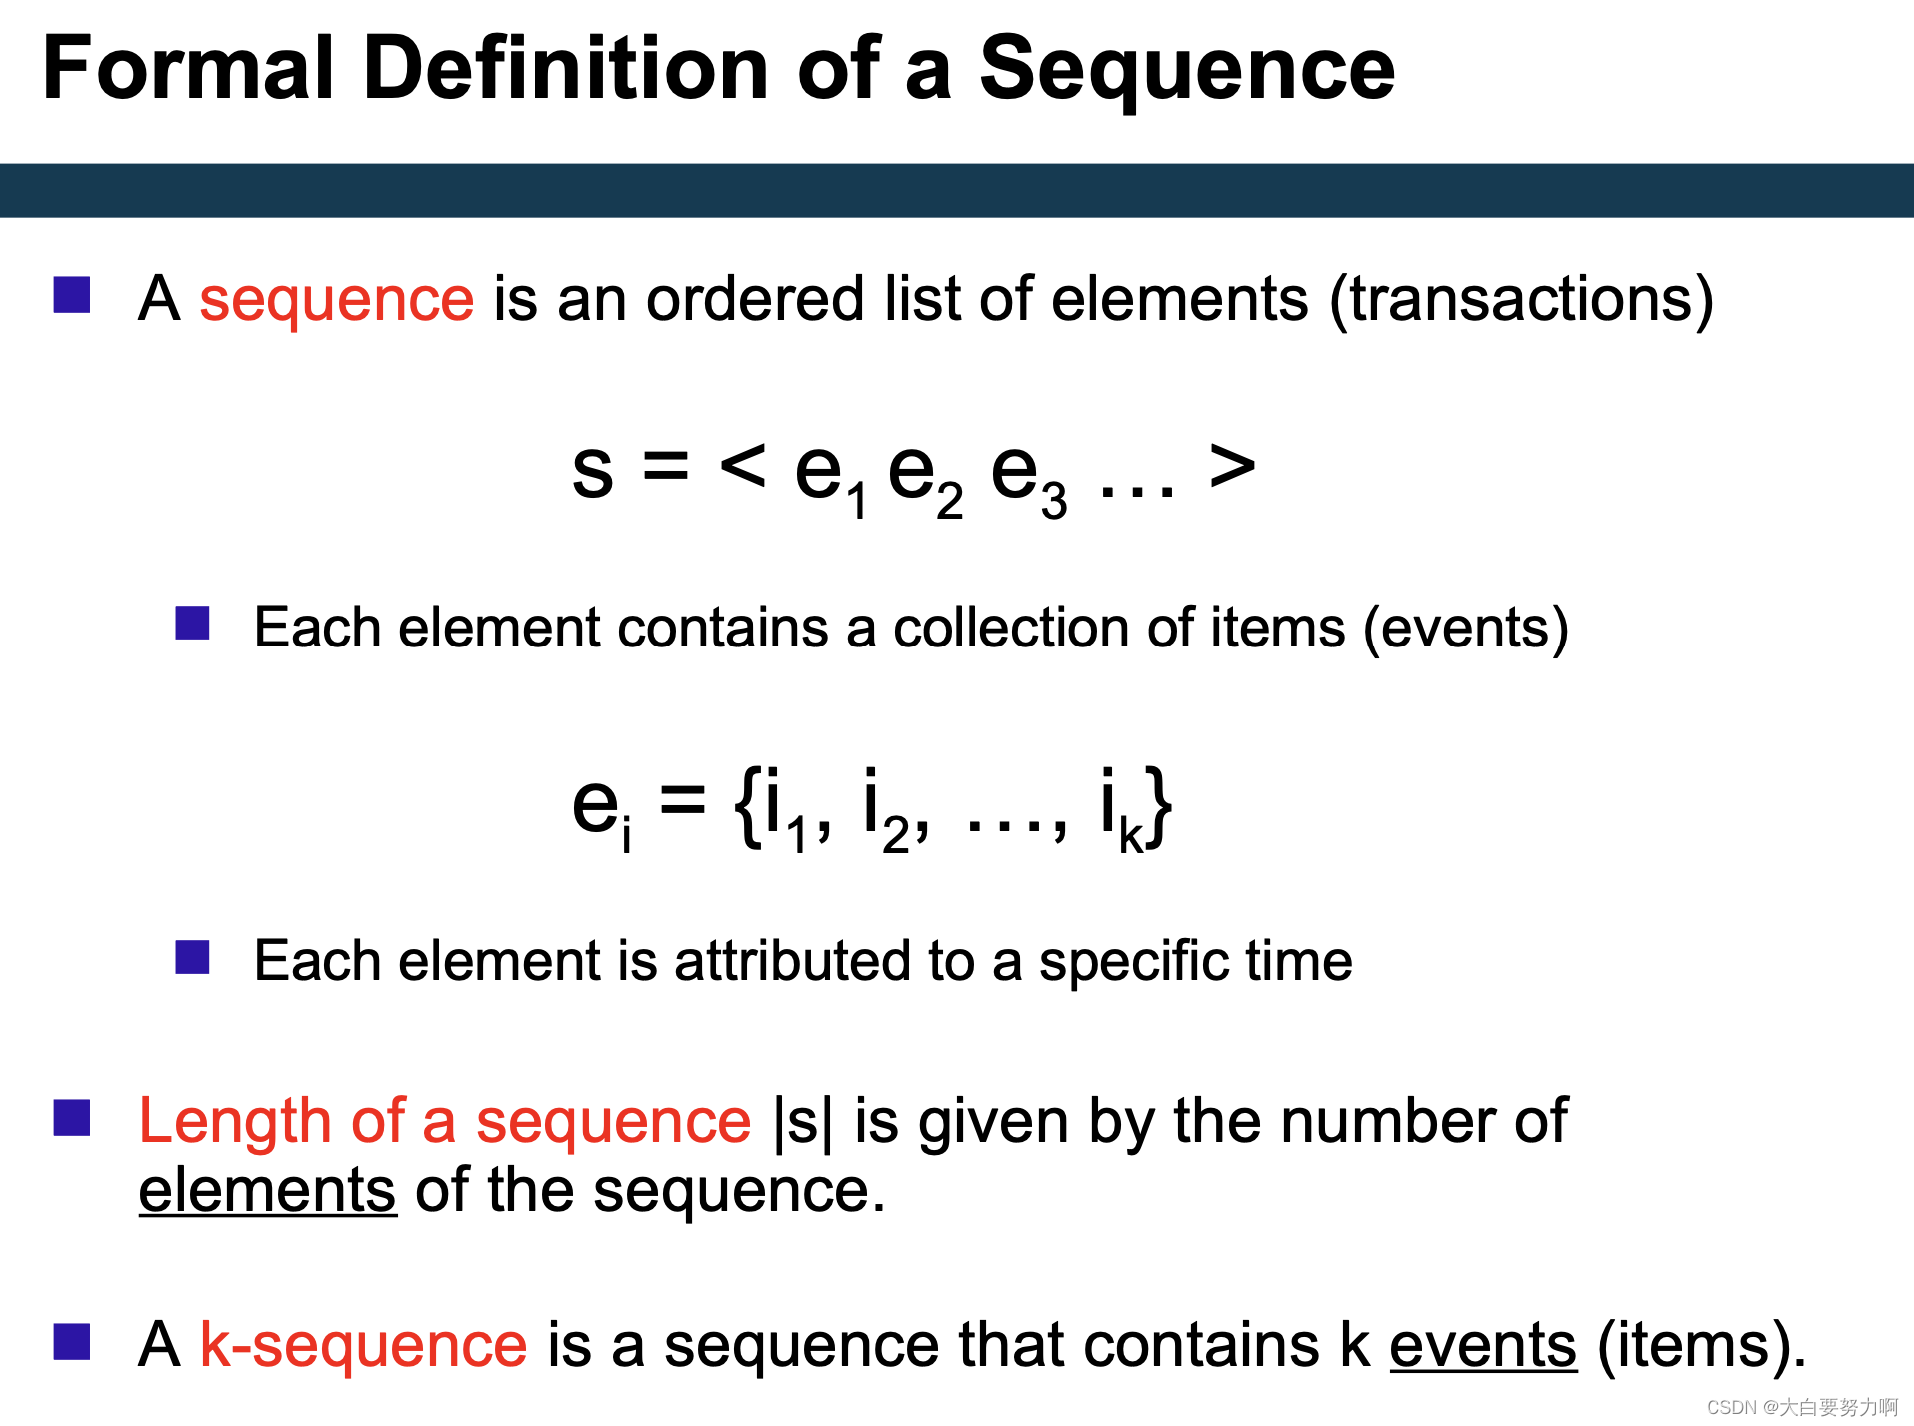 Formal Definition of a Sequence